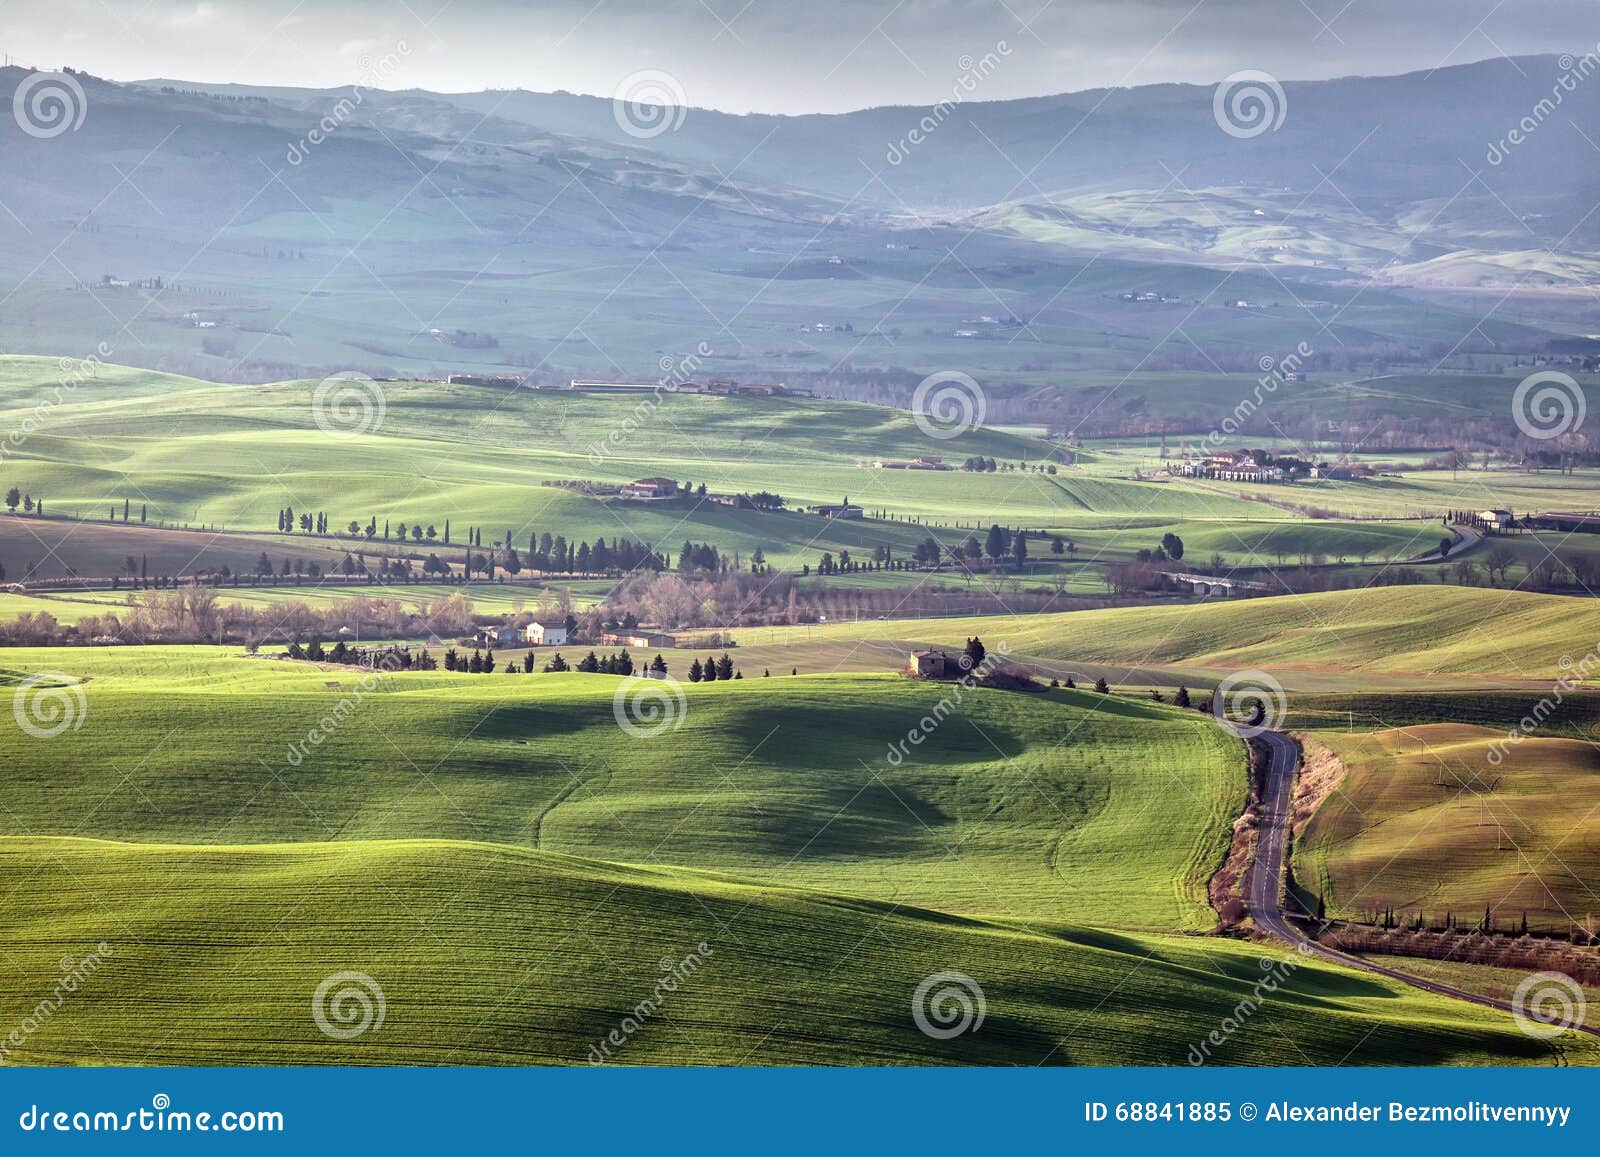 Early Spring in Tuscany, Italy Stock Image - Image of springtime, road ...